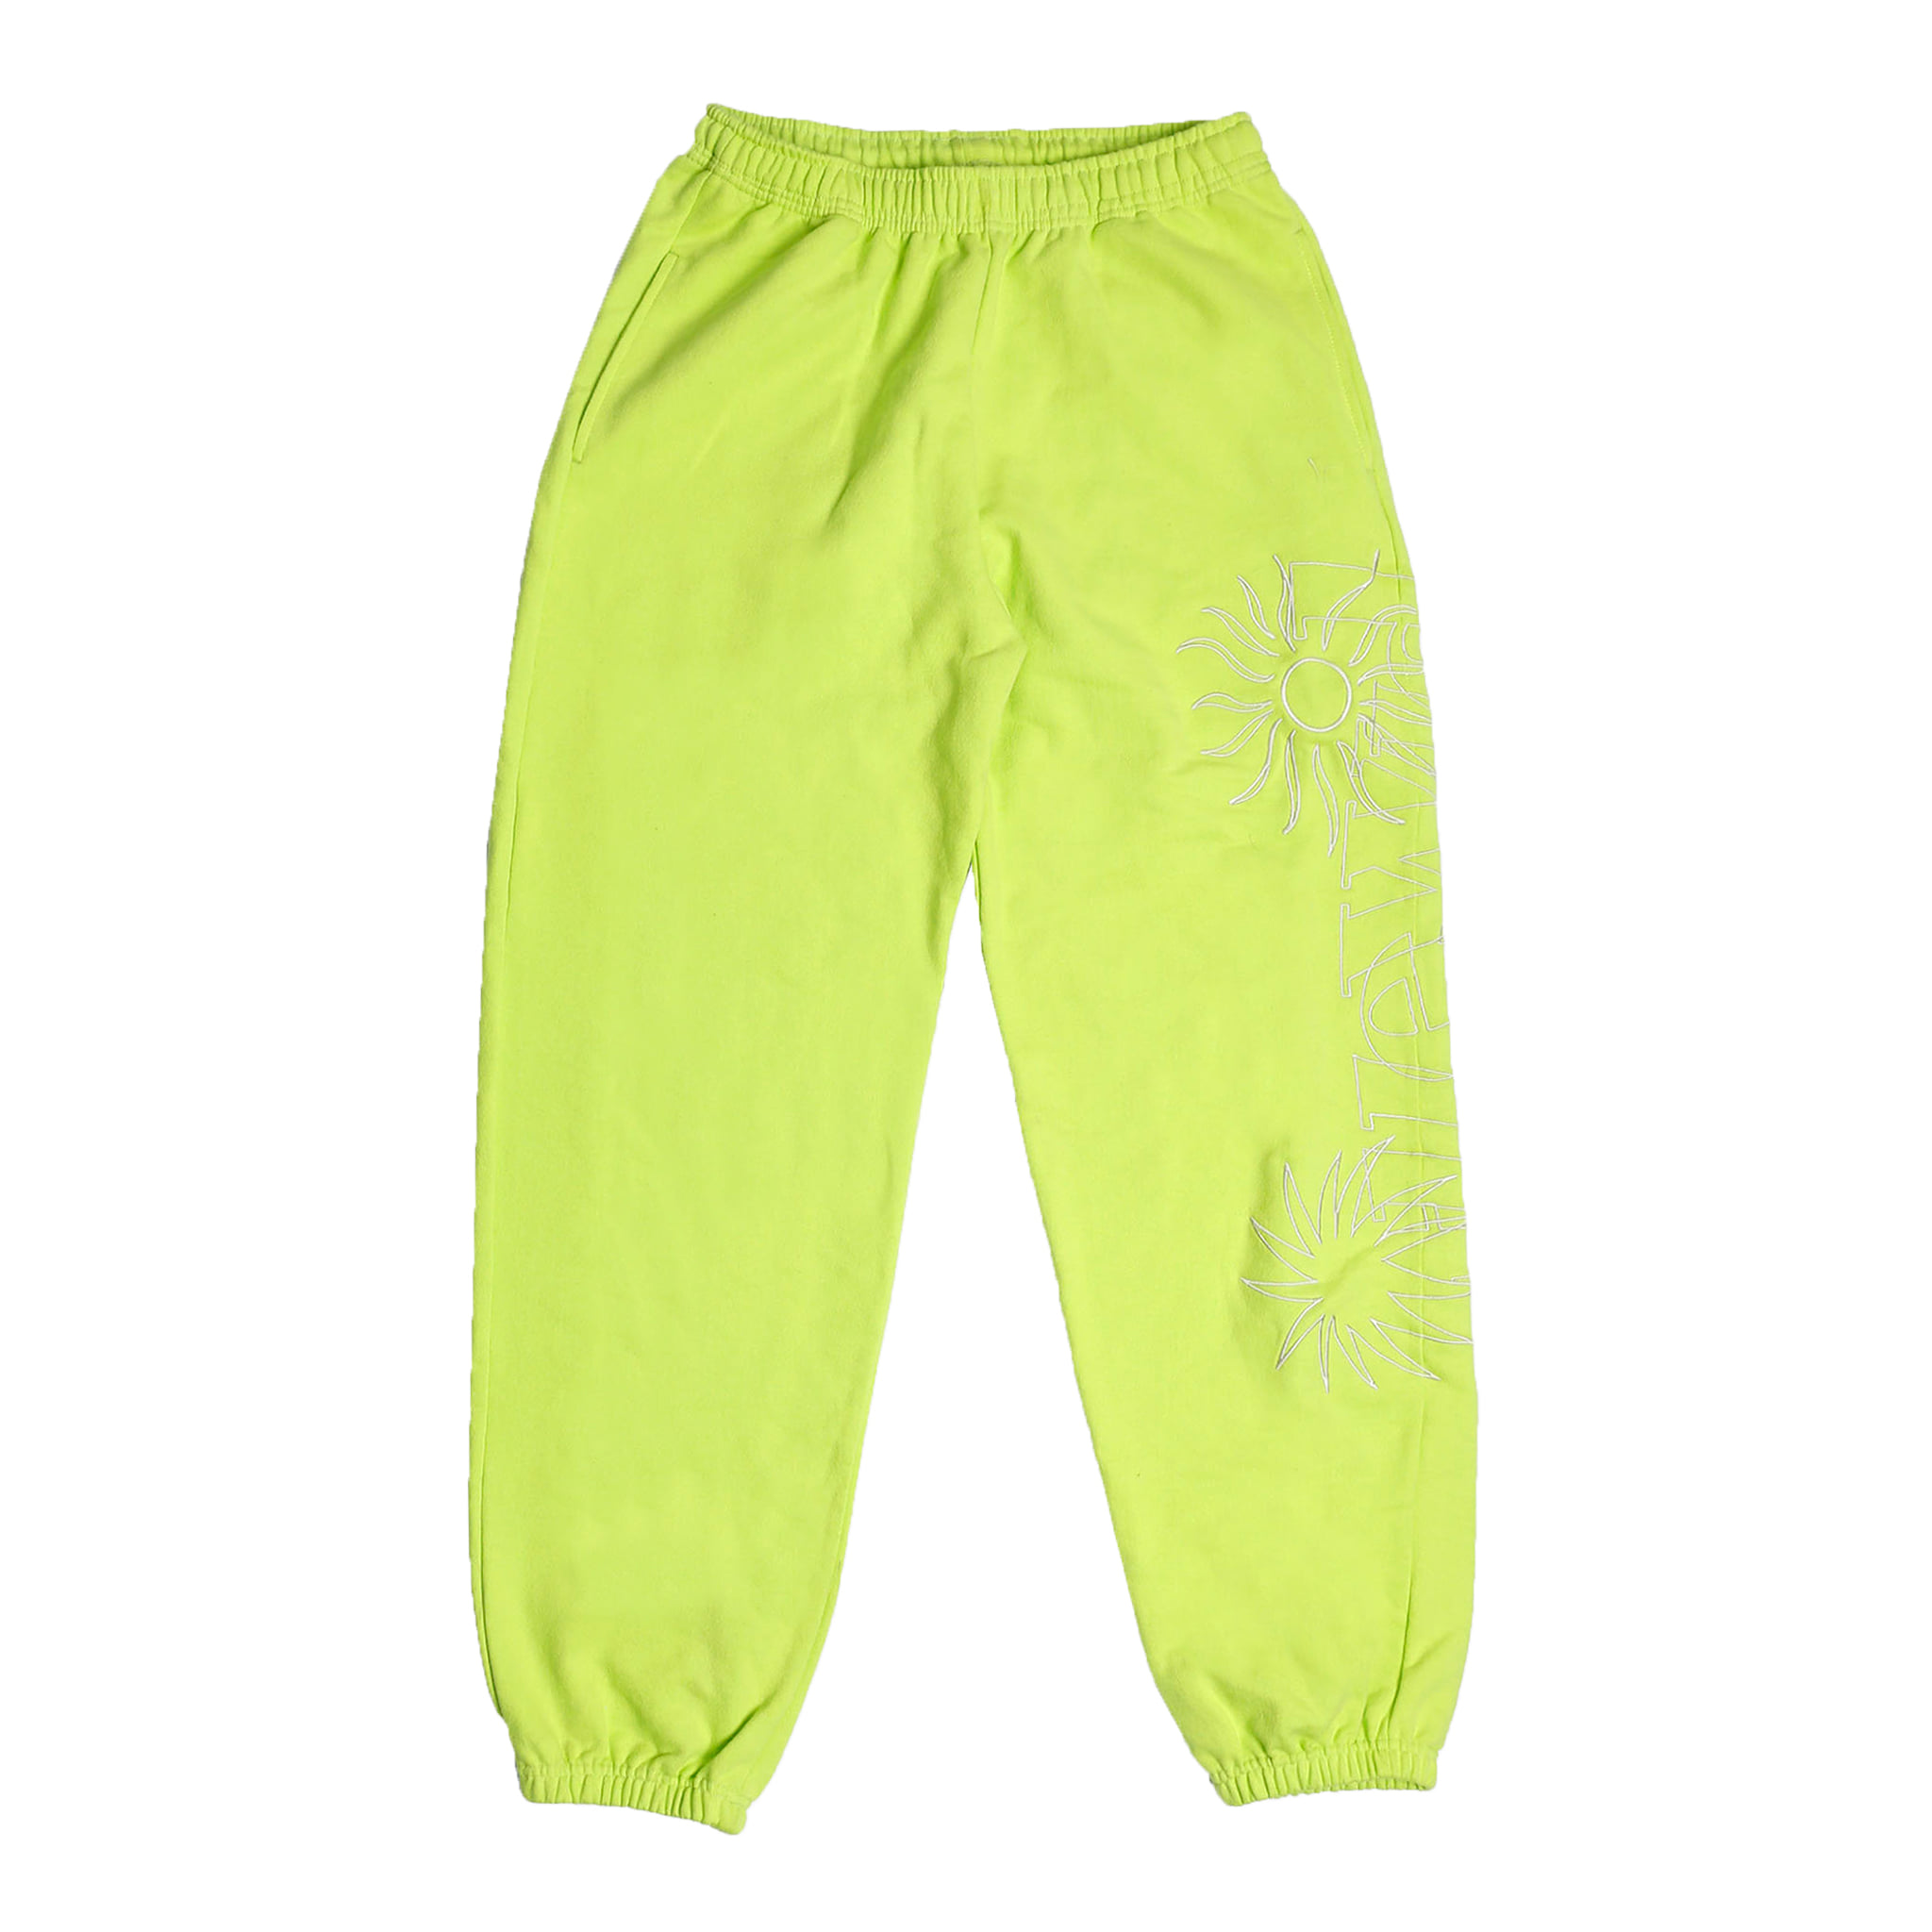 Tuewid classic sweatpants in drop fit Appple green colour